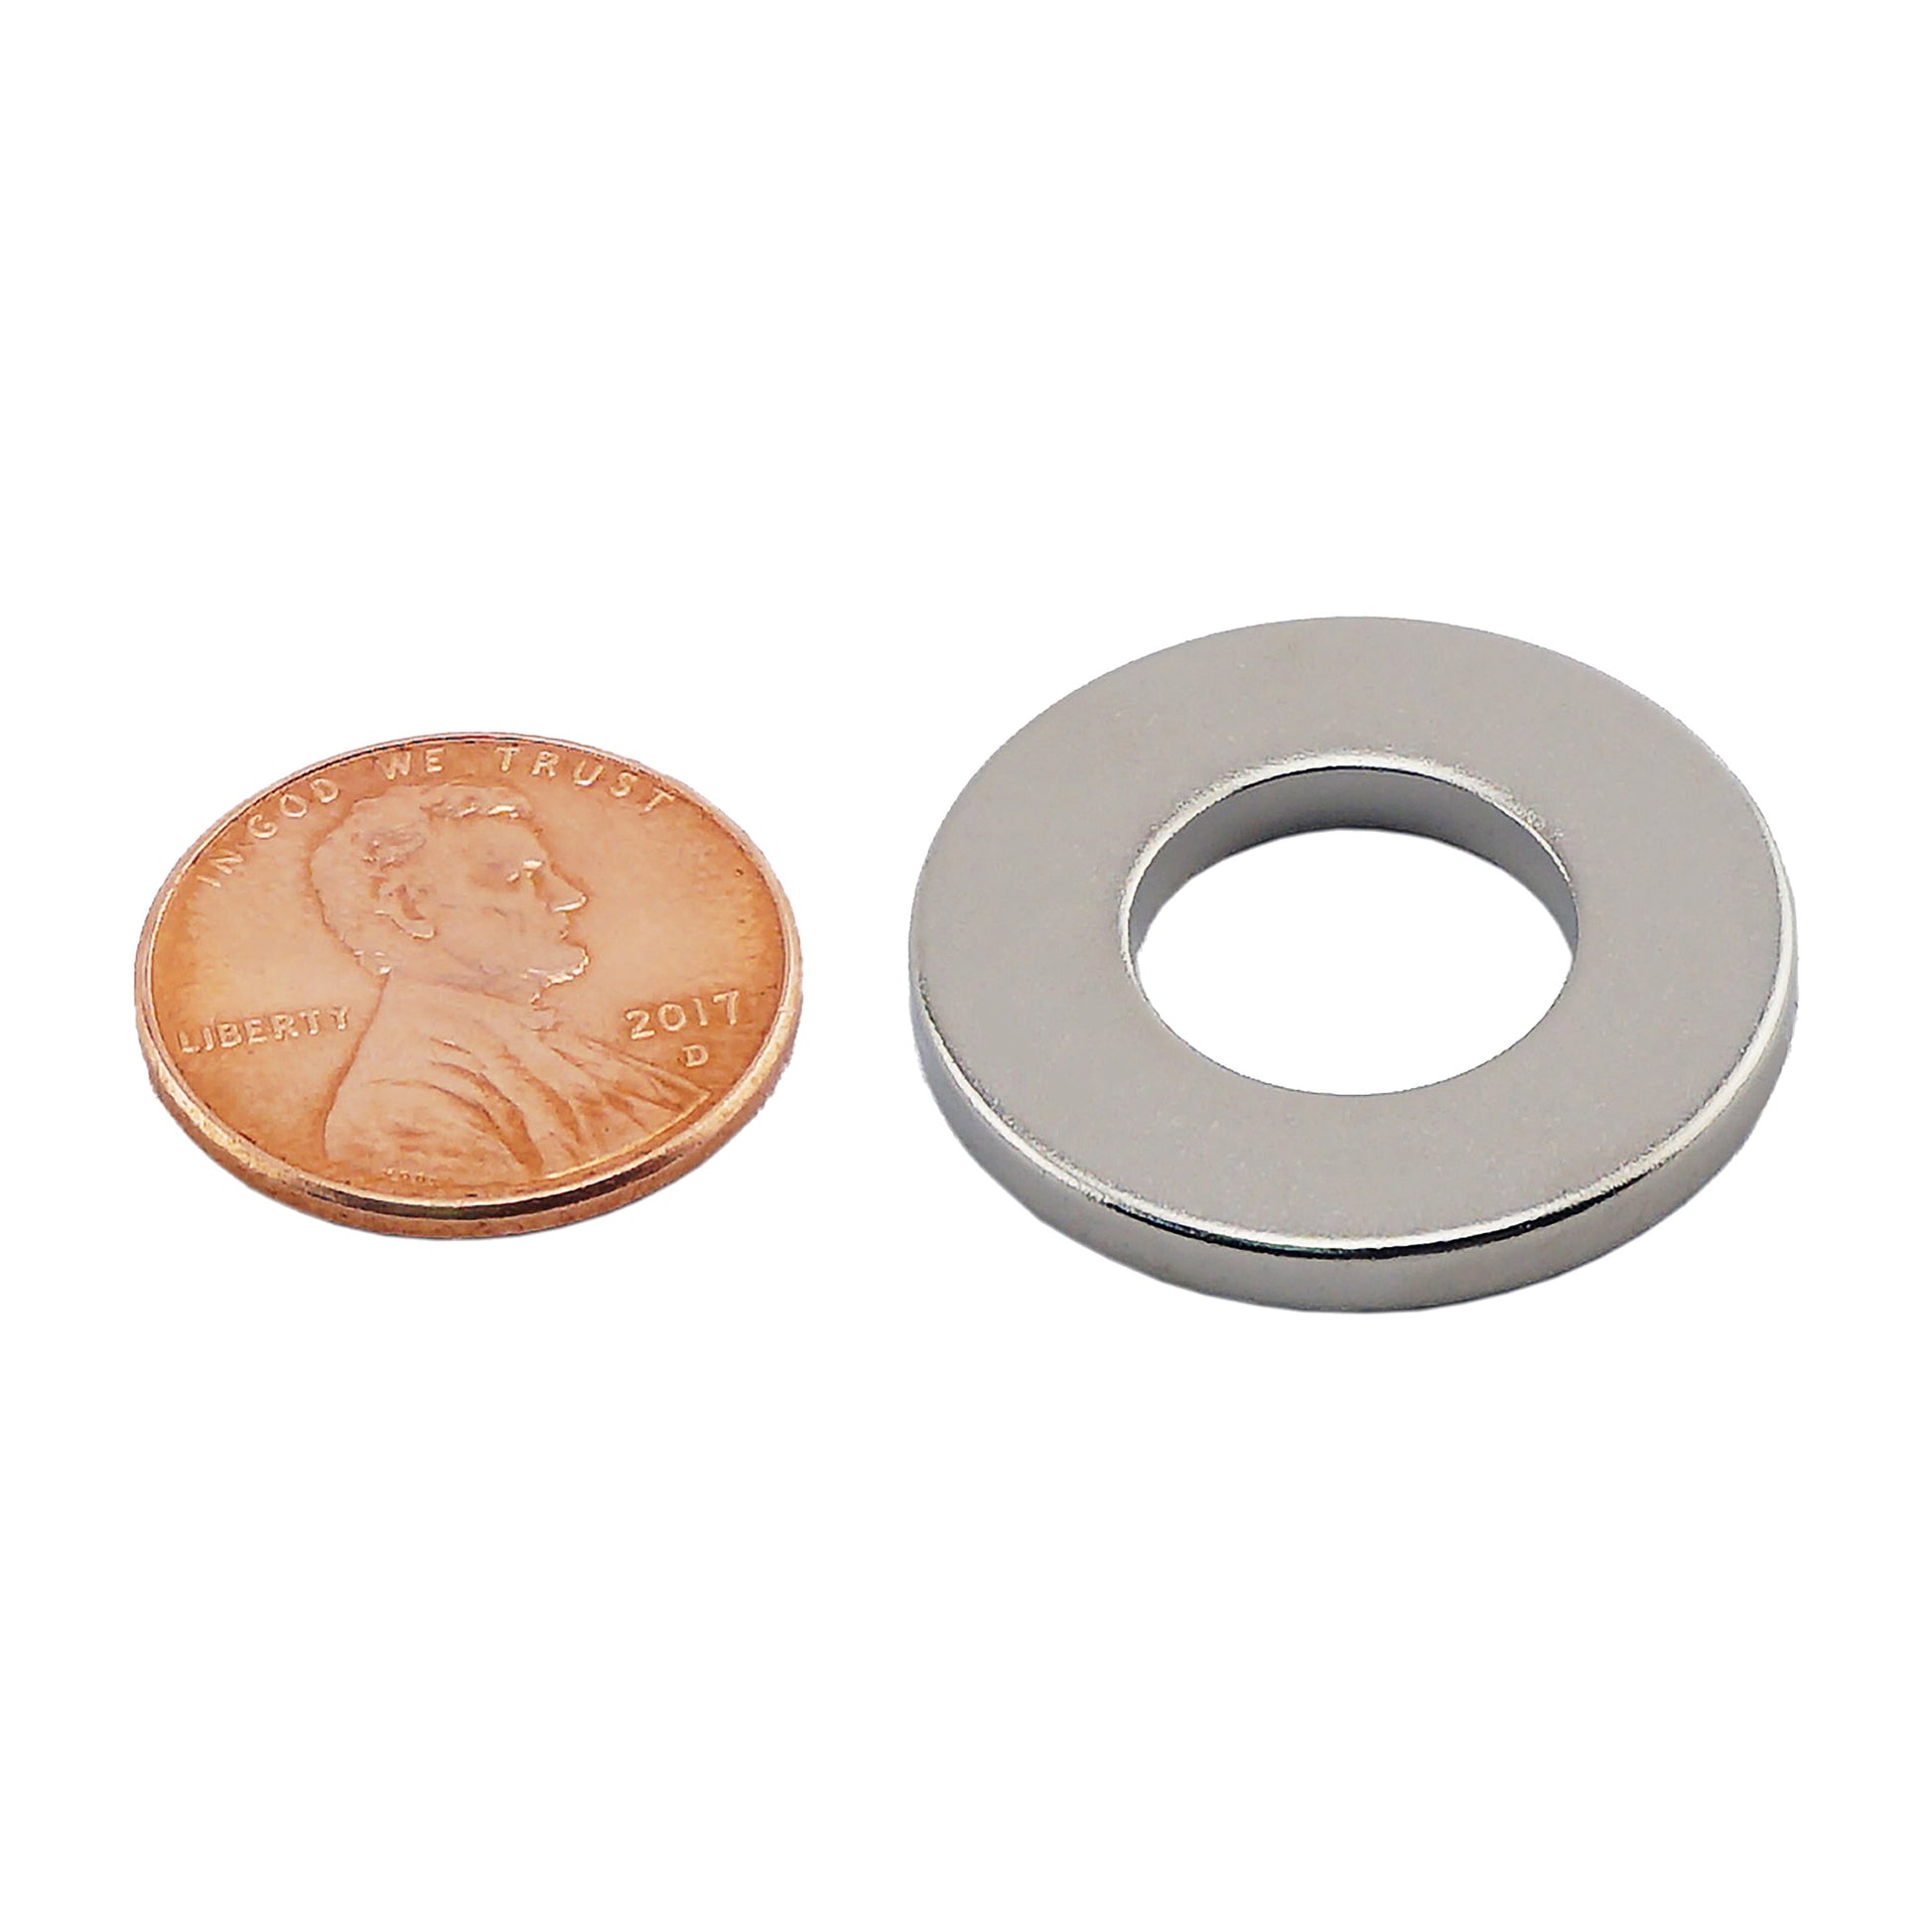 Load image into Gallery viewer, NR010007N Neodymium Ring Magnet - Compared to Penny for Size Reference